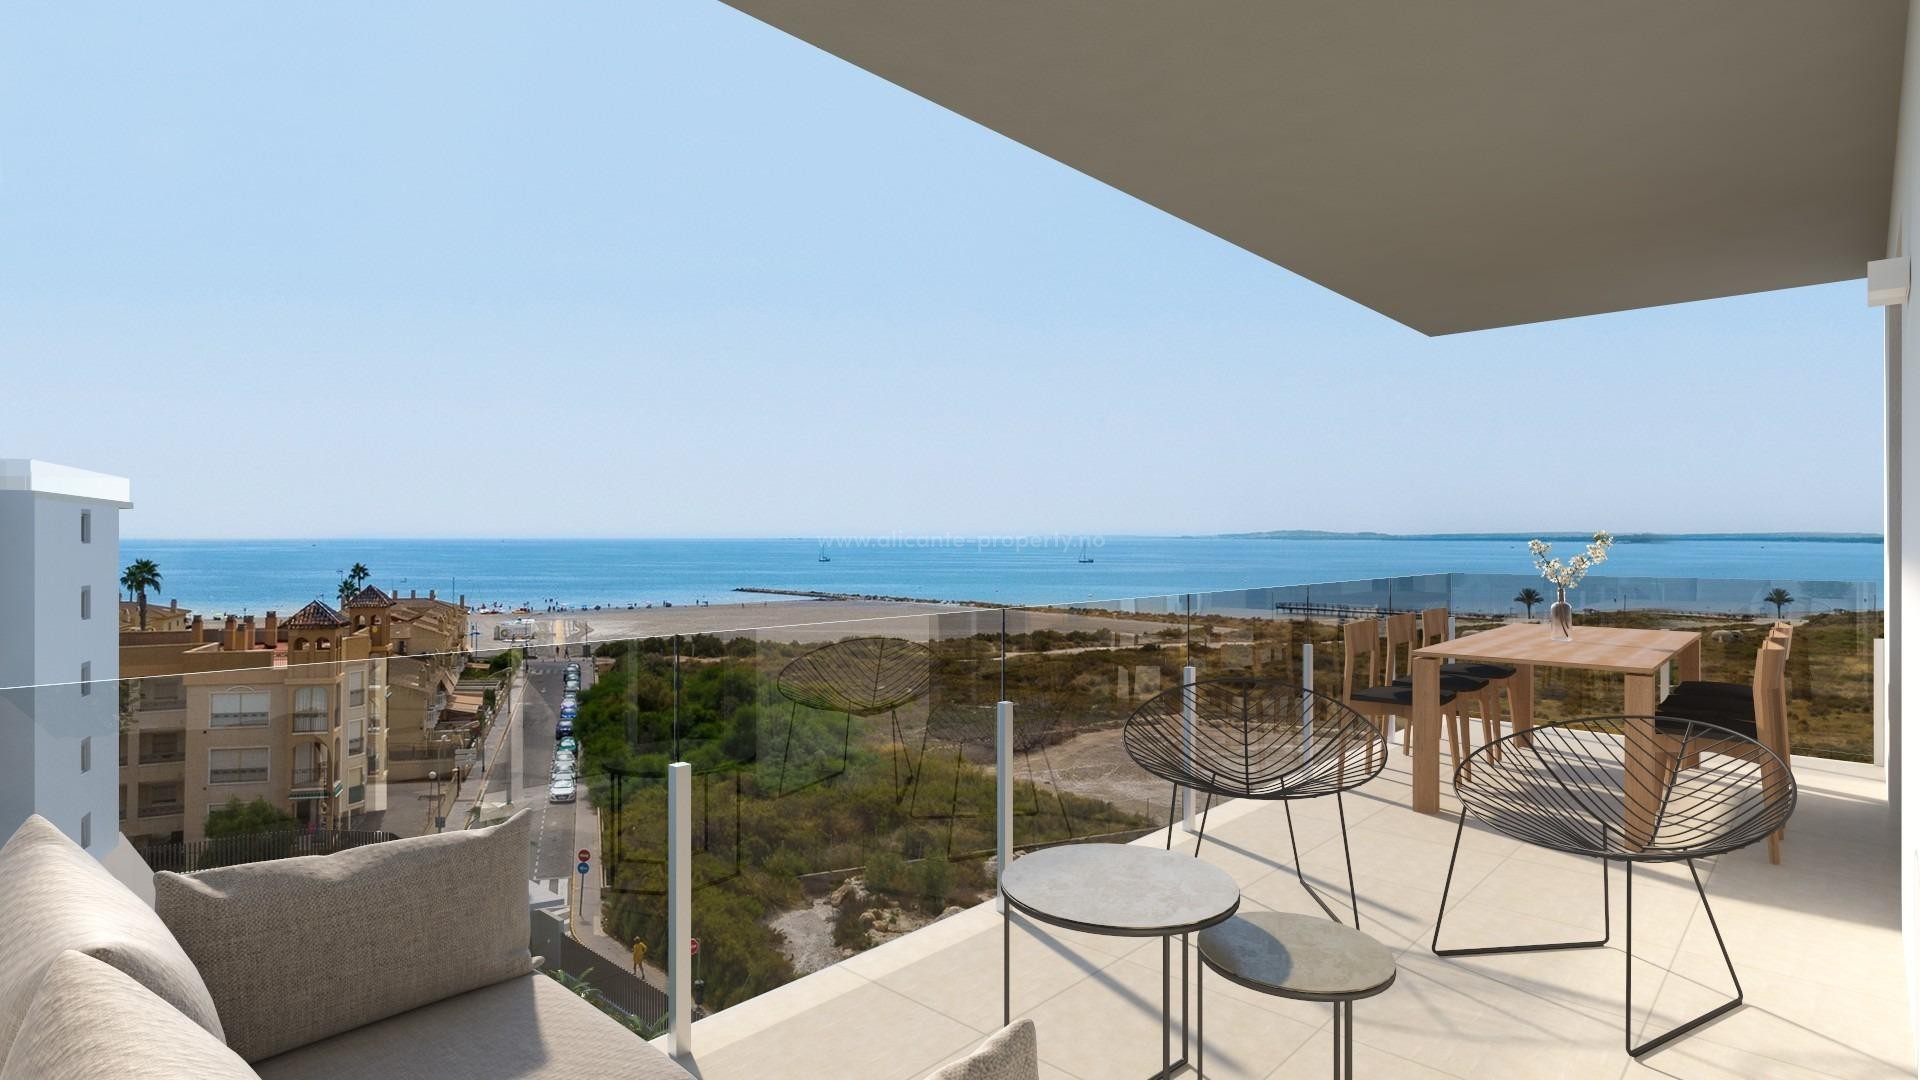 Exclusive apartments in Santa Pola, 2/3 bedrooms, 2 bathrooms, swimming pool with beach access, shared garden equipped with showers. Very close to the sea.